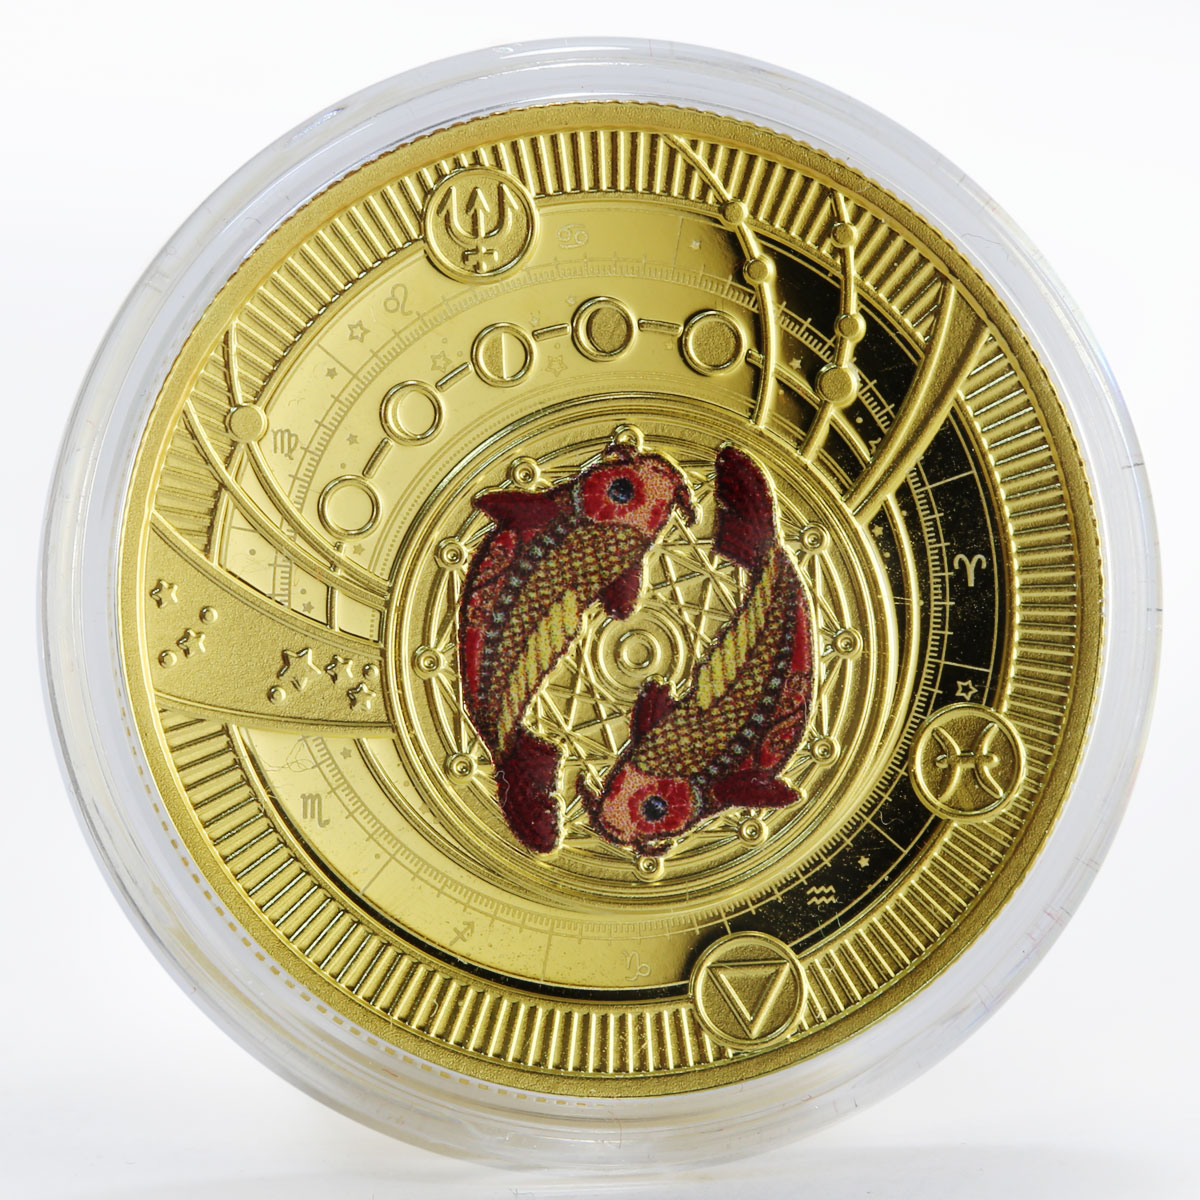 Cameroon 500 francs Zodiac Signs Pisces colored gilded proof silver coin 2018